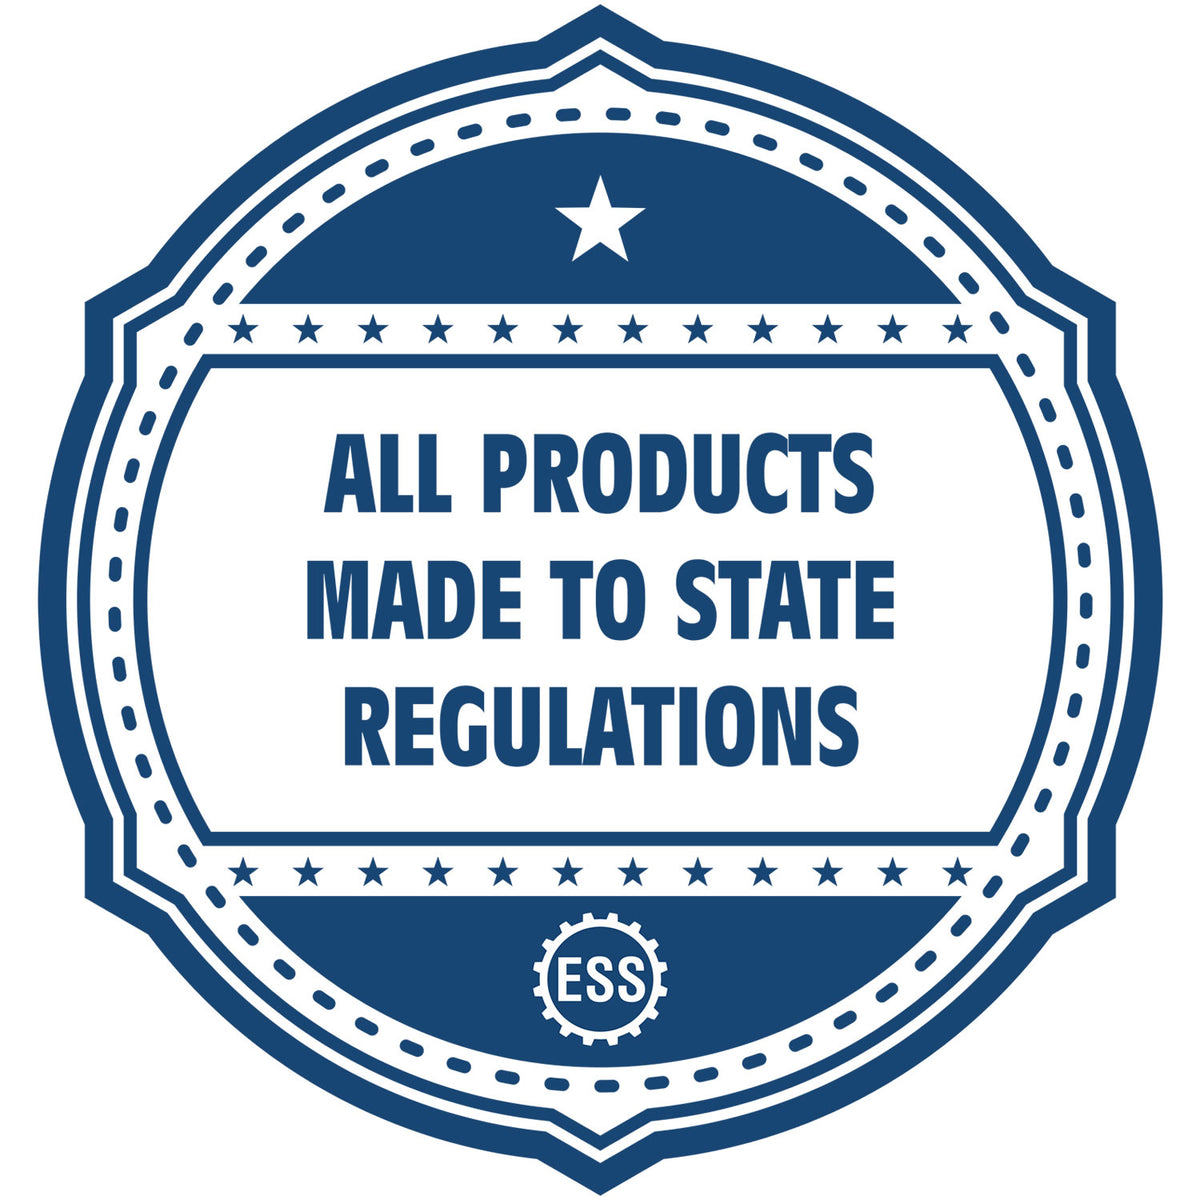 An icon or badge element for the Colorado Professional Engineer Seal Stamp showing that this product is made in compliance with state regulations.